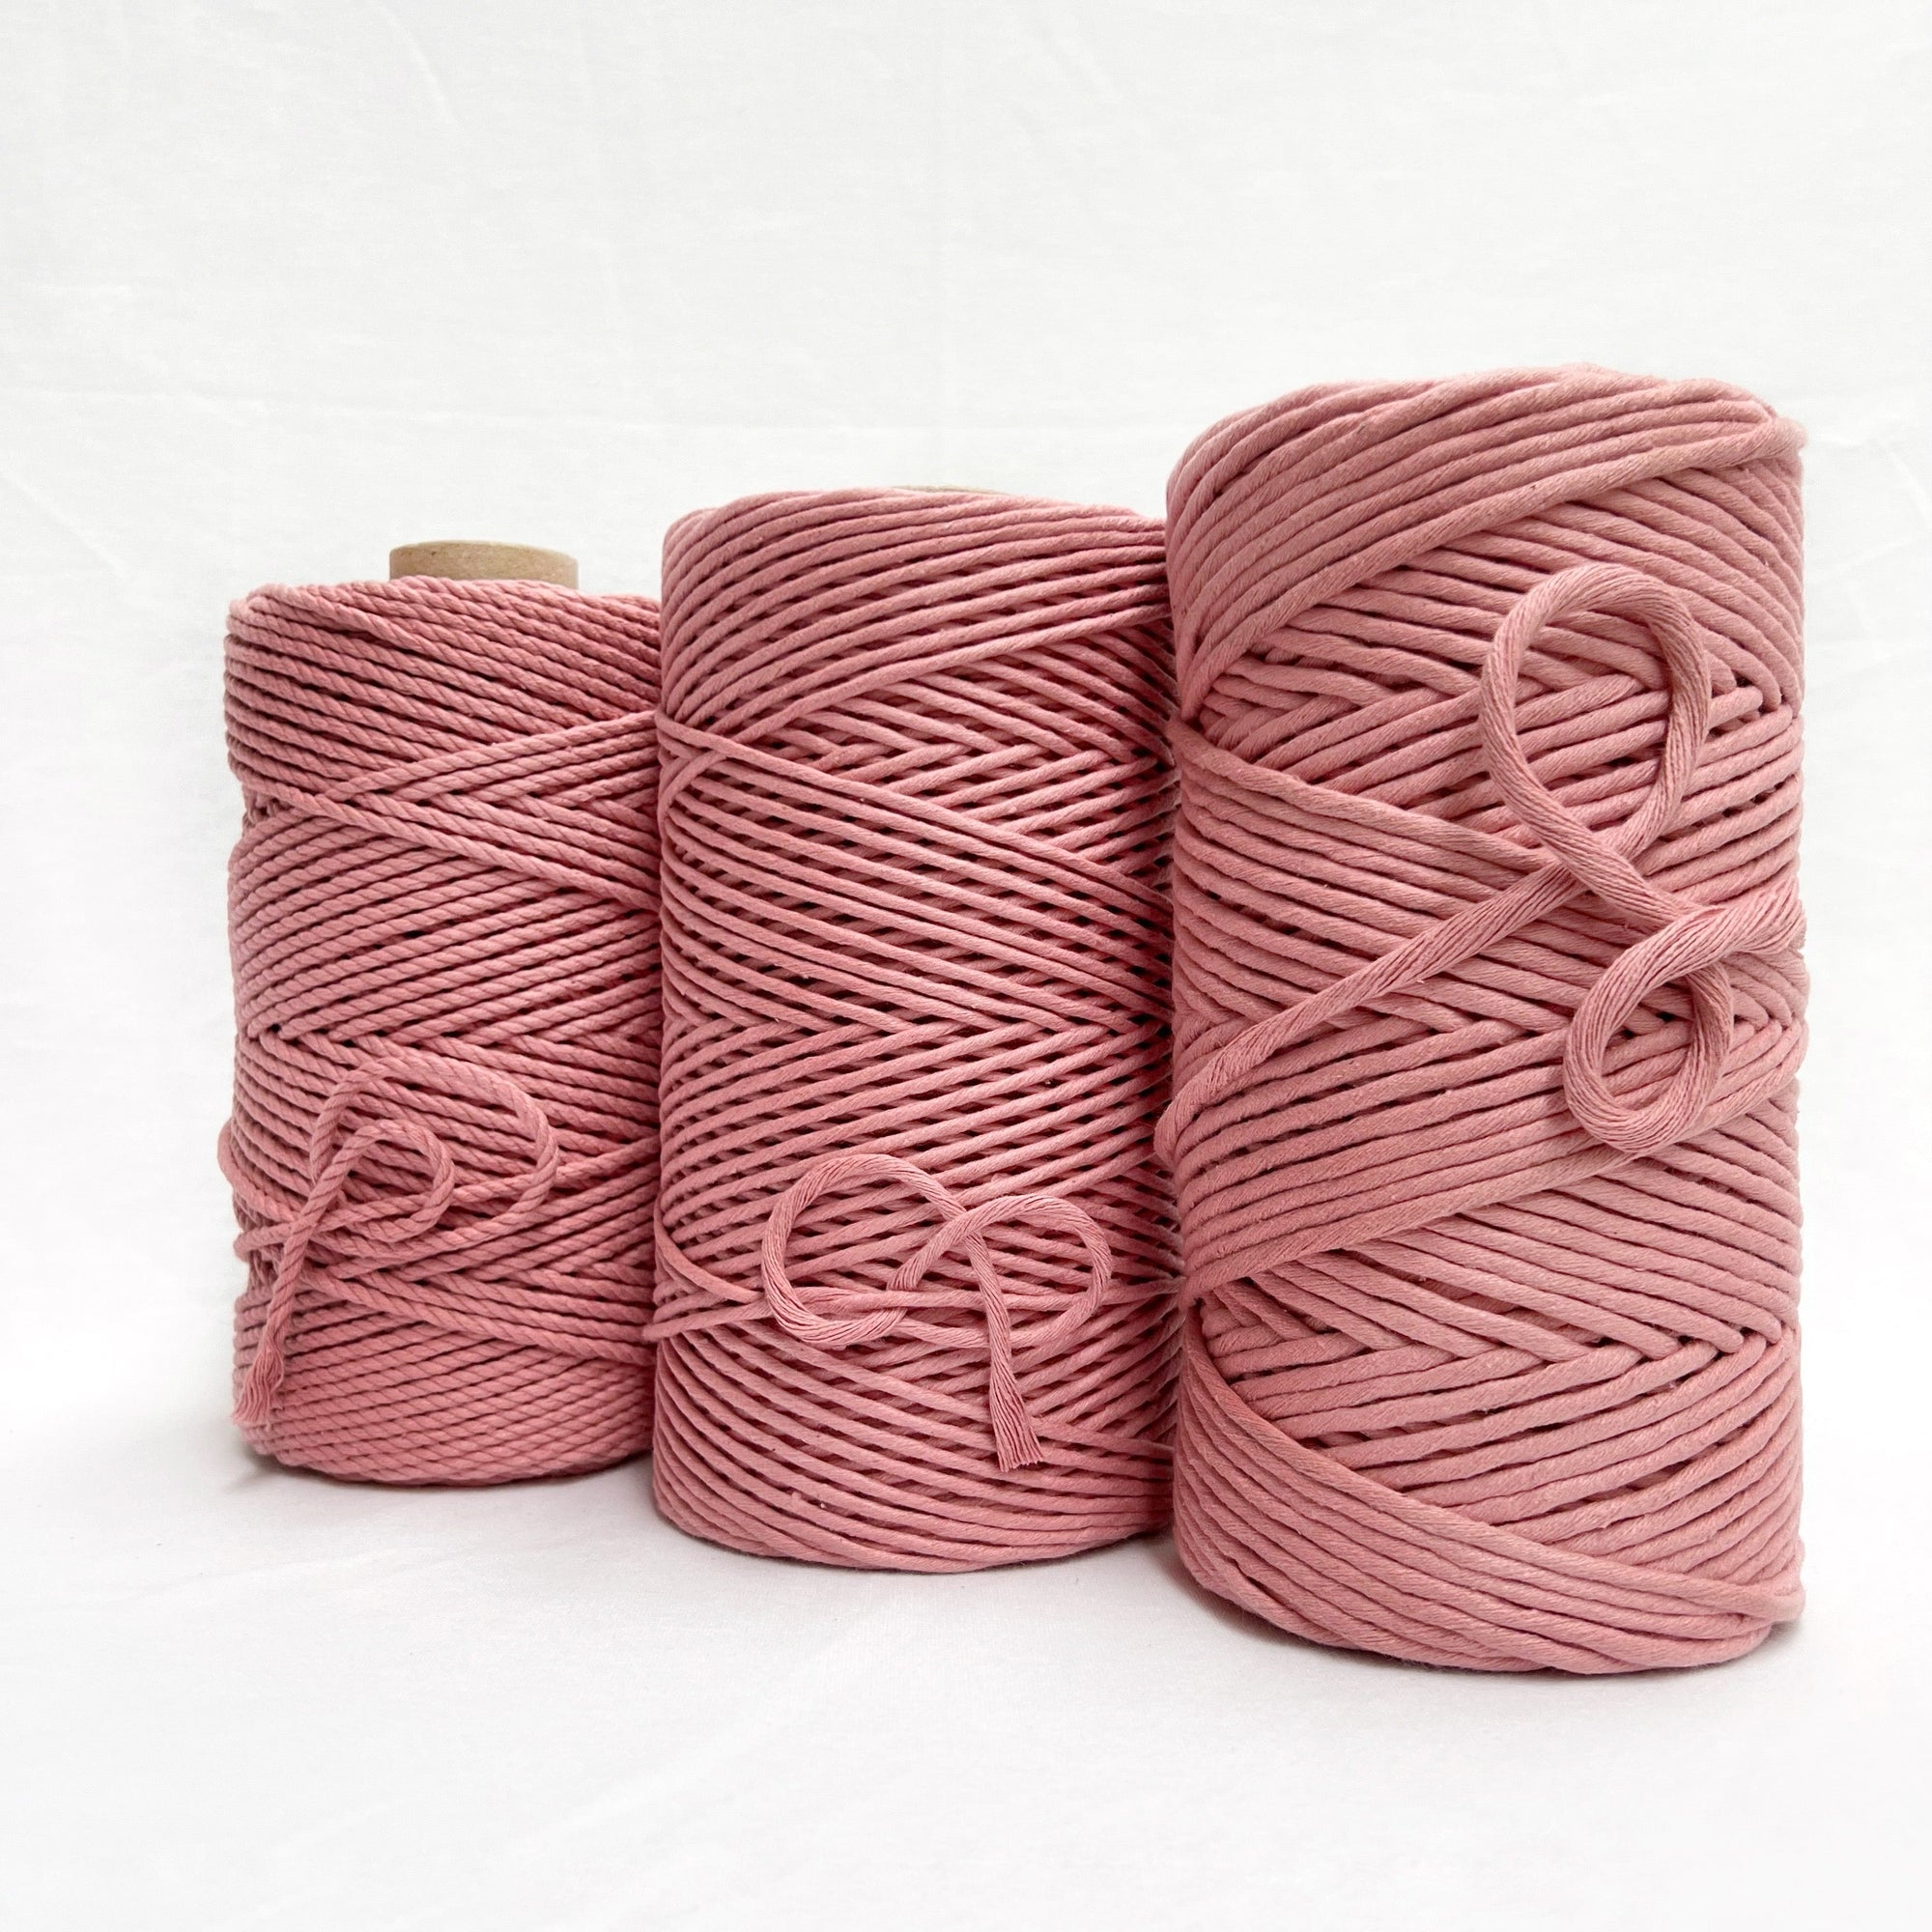 mary maker studio recycled cotton macrame rope in baked blush pink colour suitable for macrame workshops beginners and advanced artists